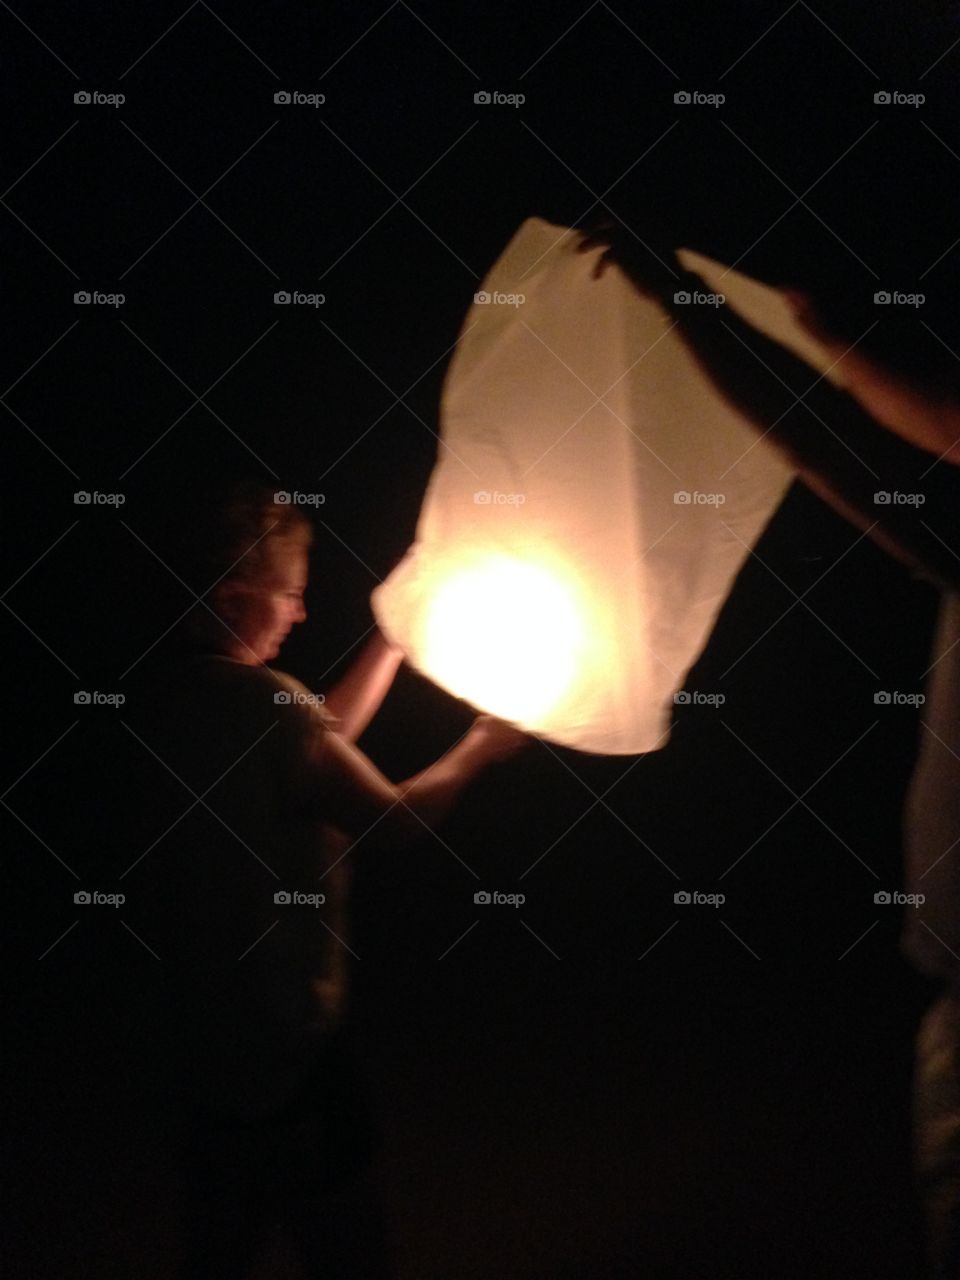 Wishing lantern being lighted on New Years evening in Thailand. 